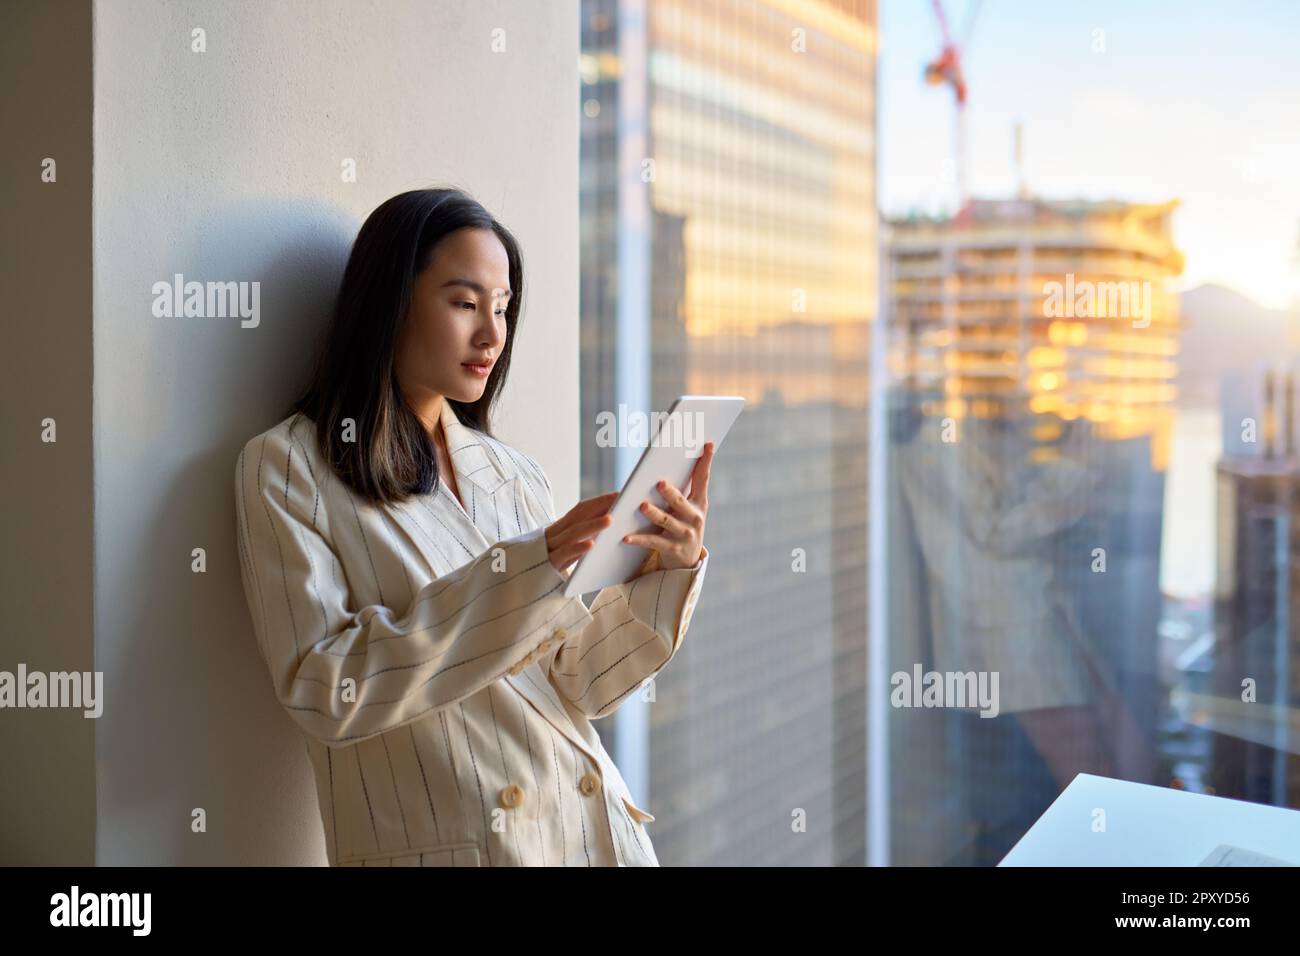 Young Asian business woman manager using tablet standing in corporate office. Stock Photo